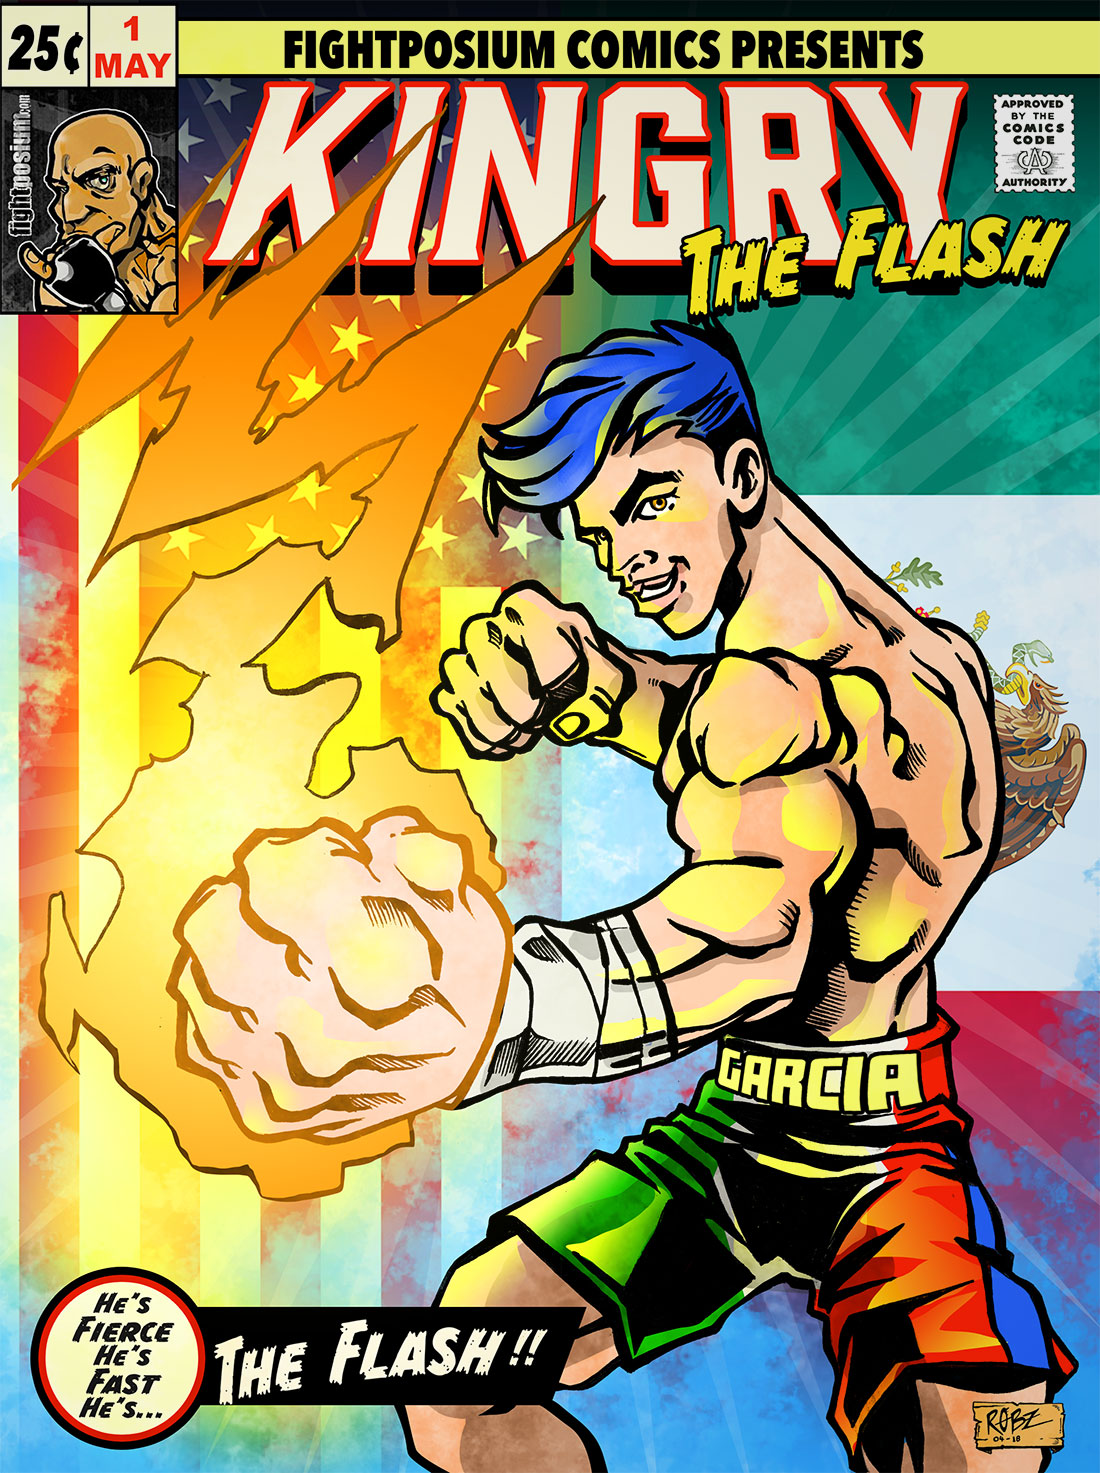 Read more about the article Ryan “The Flash” Garcia – KingRy